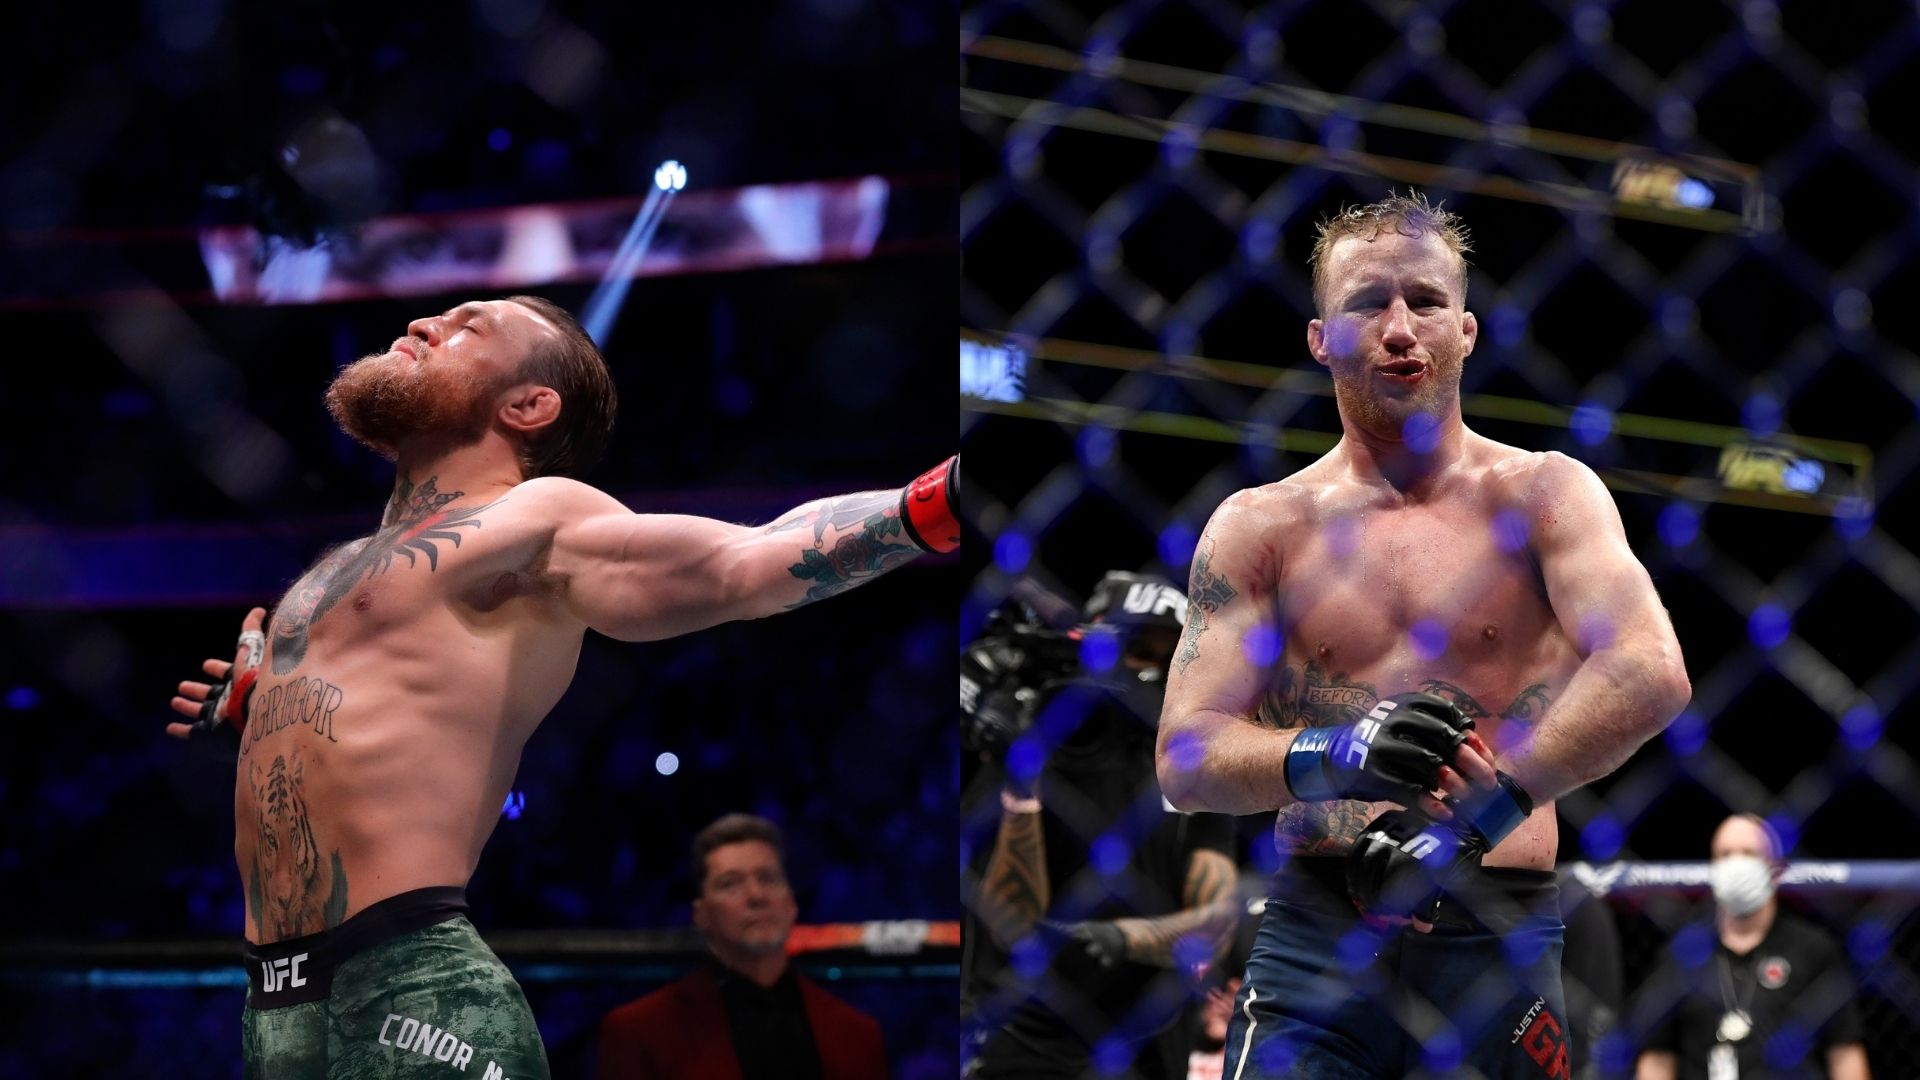 Justin Gaethje is not a fan of Conor McGregor